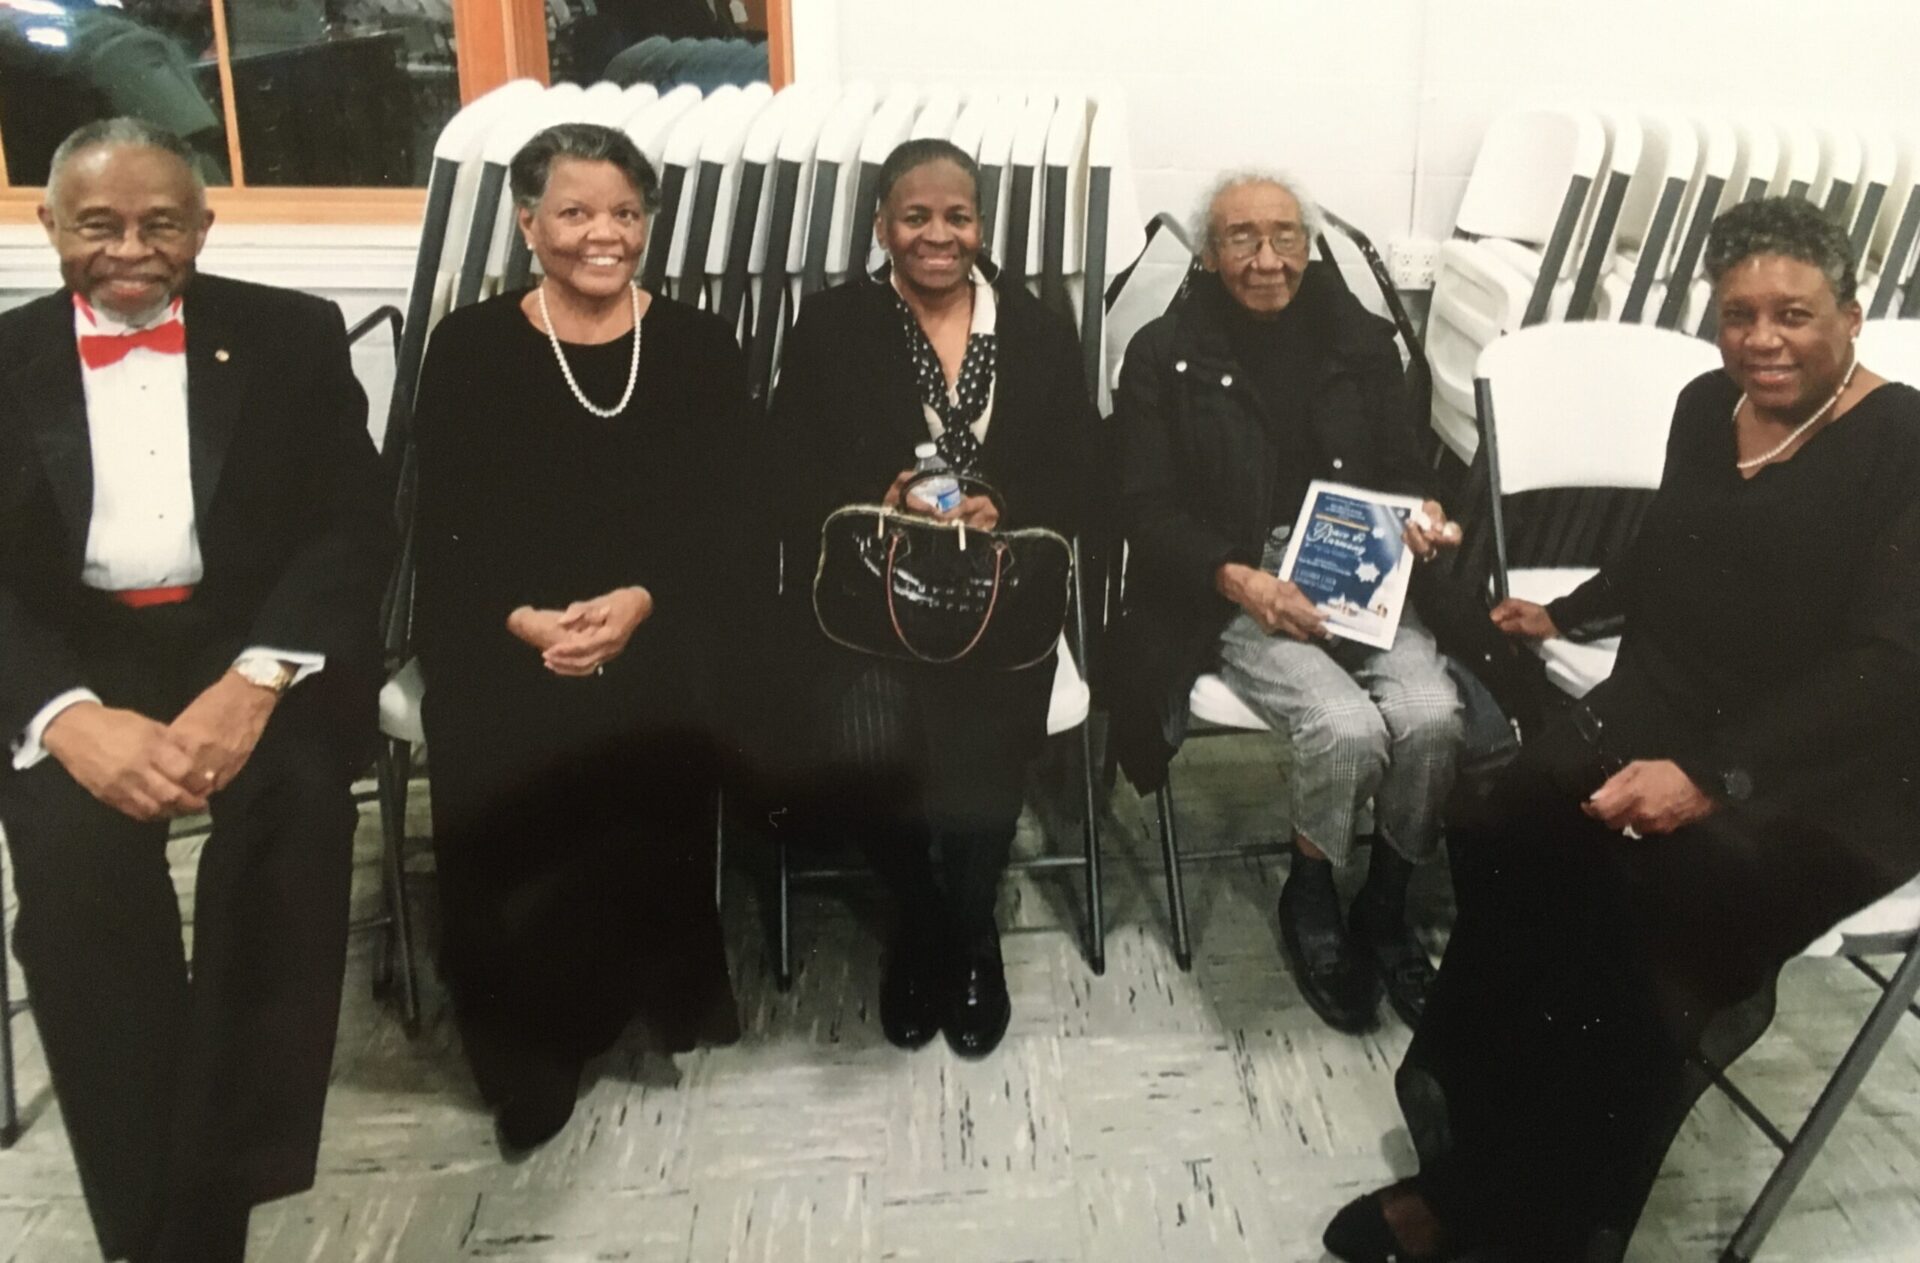 John and Andrea Parham, left, with two friends and Deborah Jones-Miller, right.